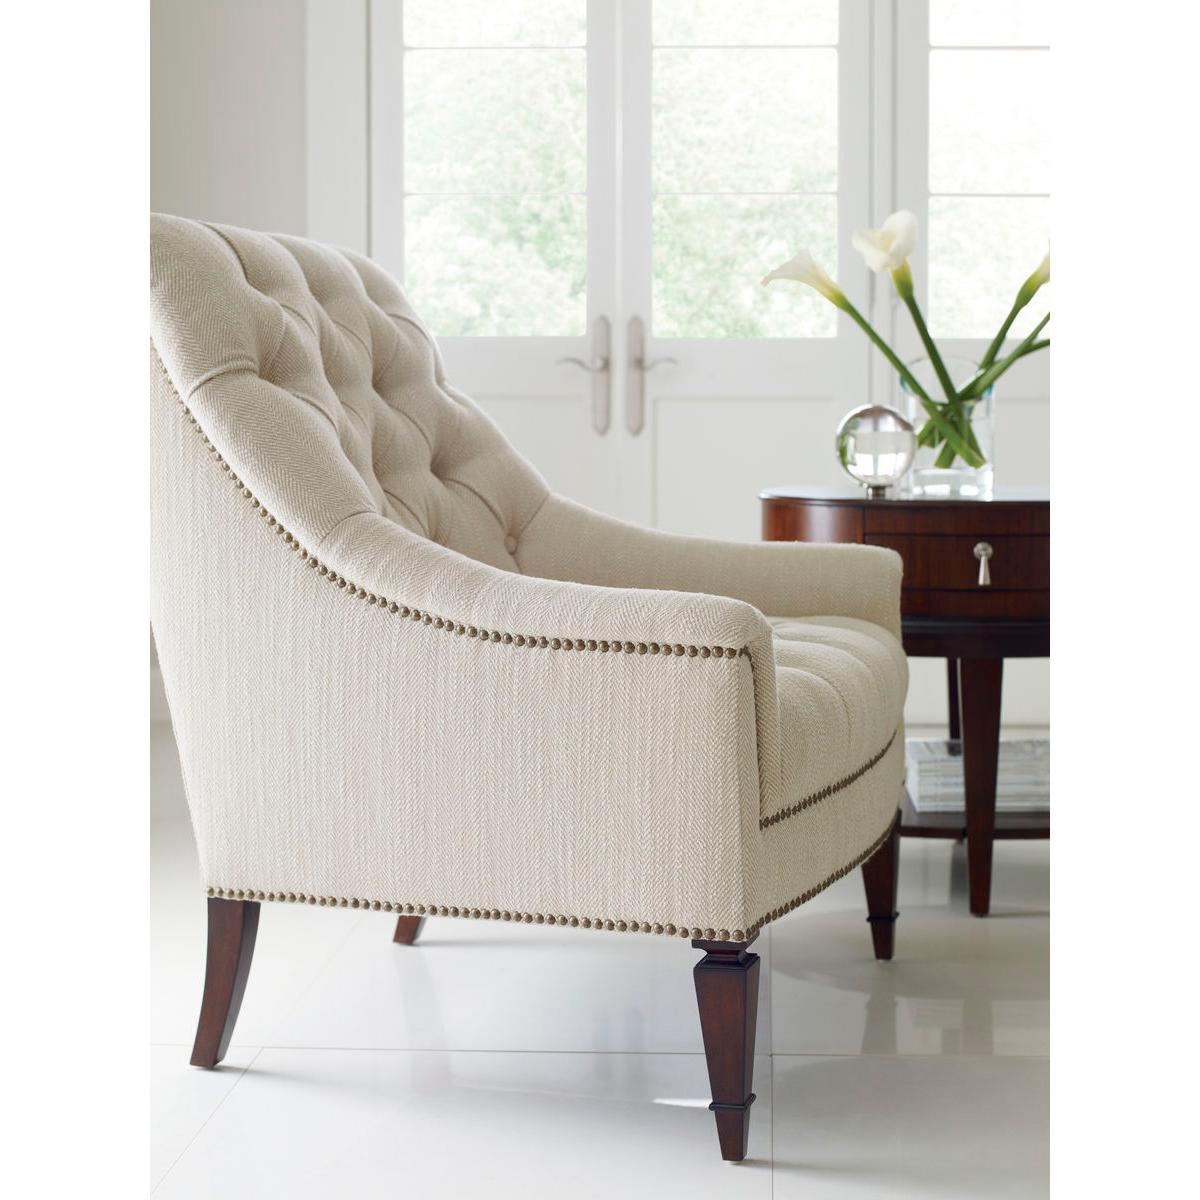 American Classical Classic Tufted Armchair For Sale